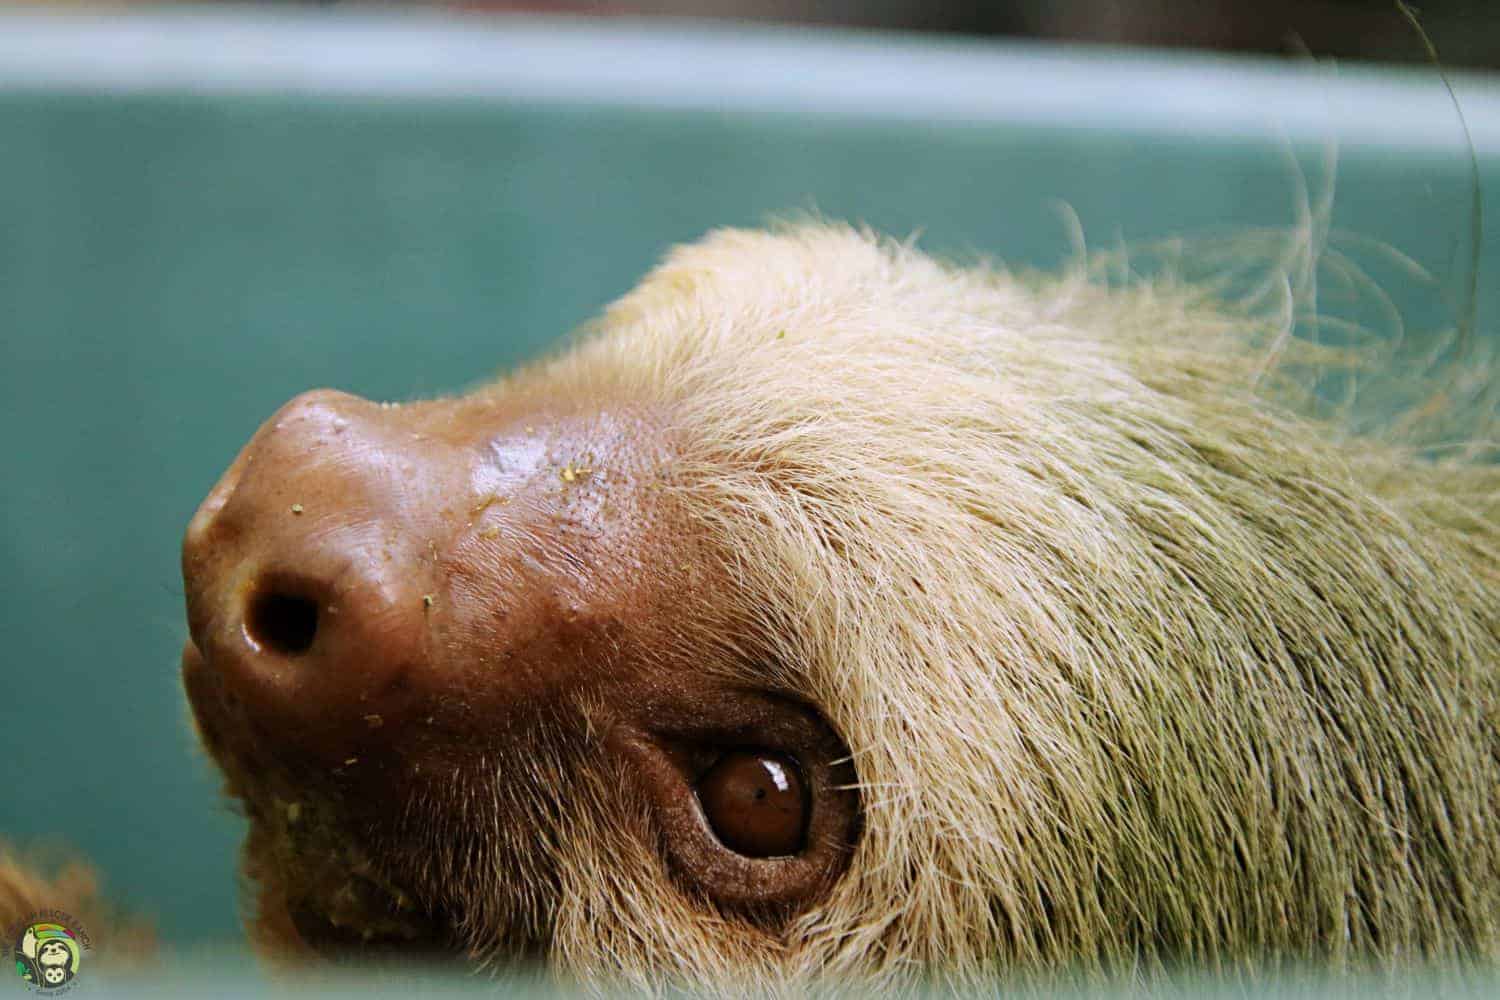 Malakai, a two-fingered sloth in Costa Rica.